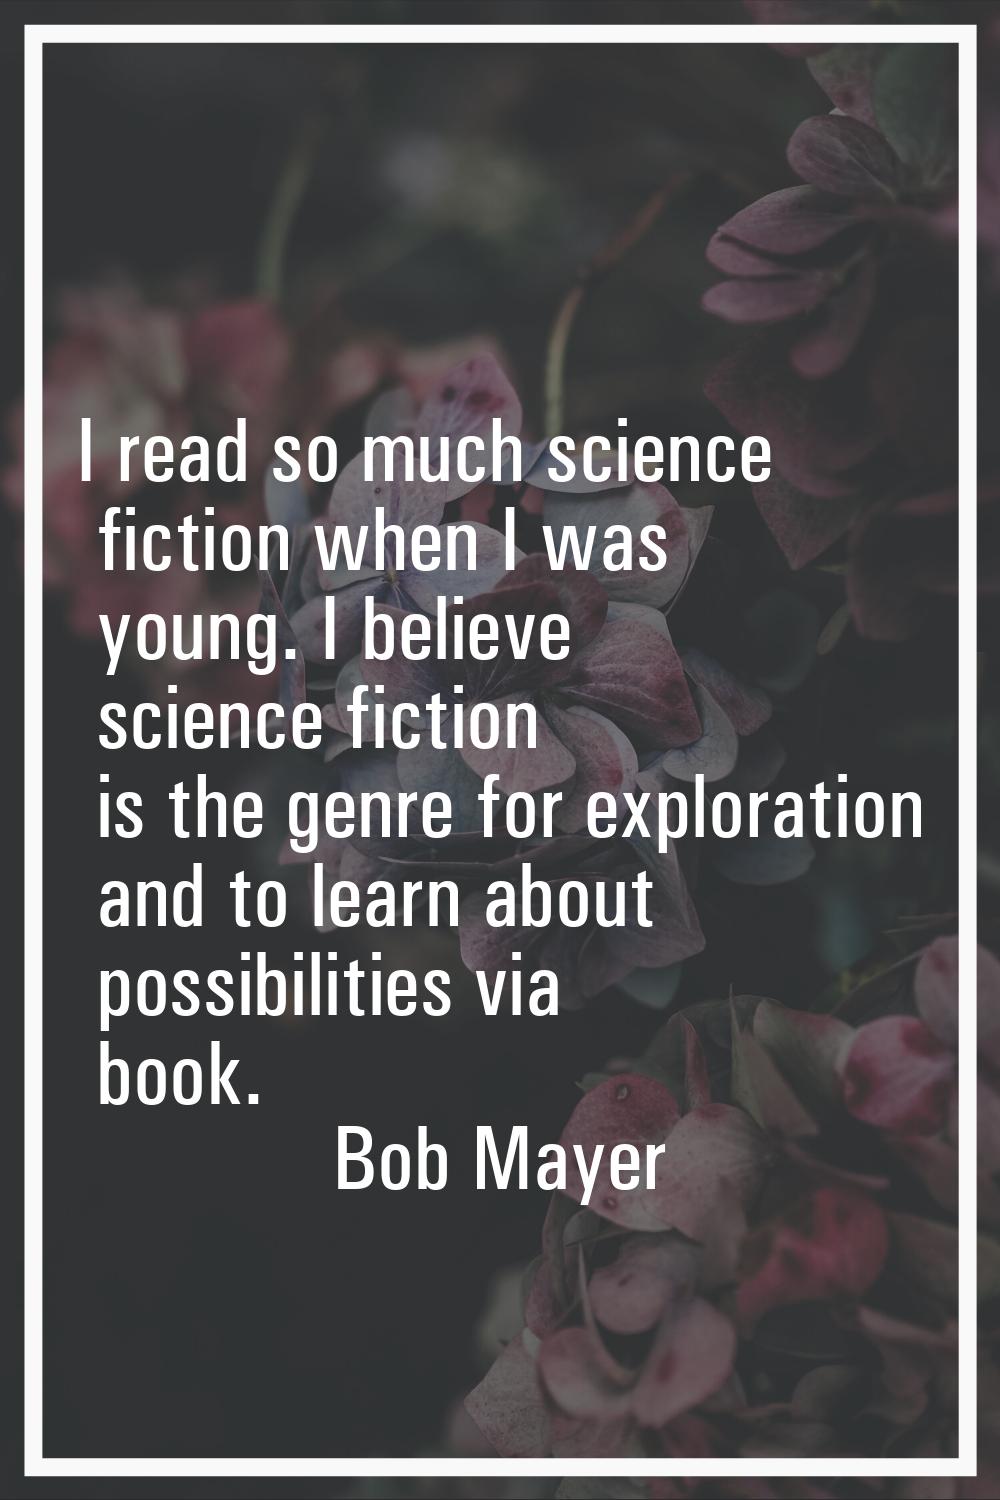 I read so much science fiction when I was young. I believe science fiction is the genre for explora